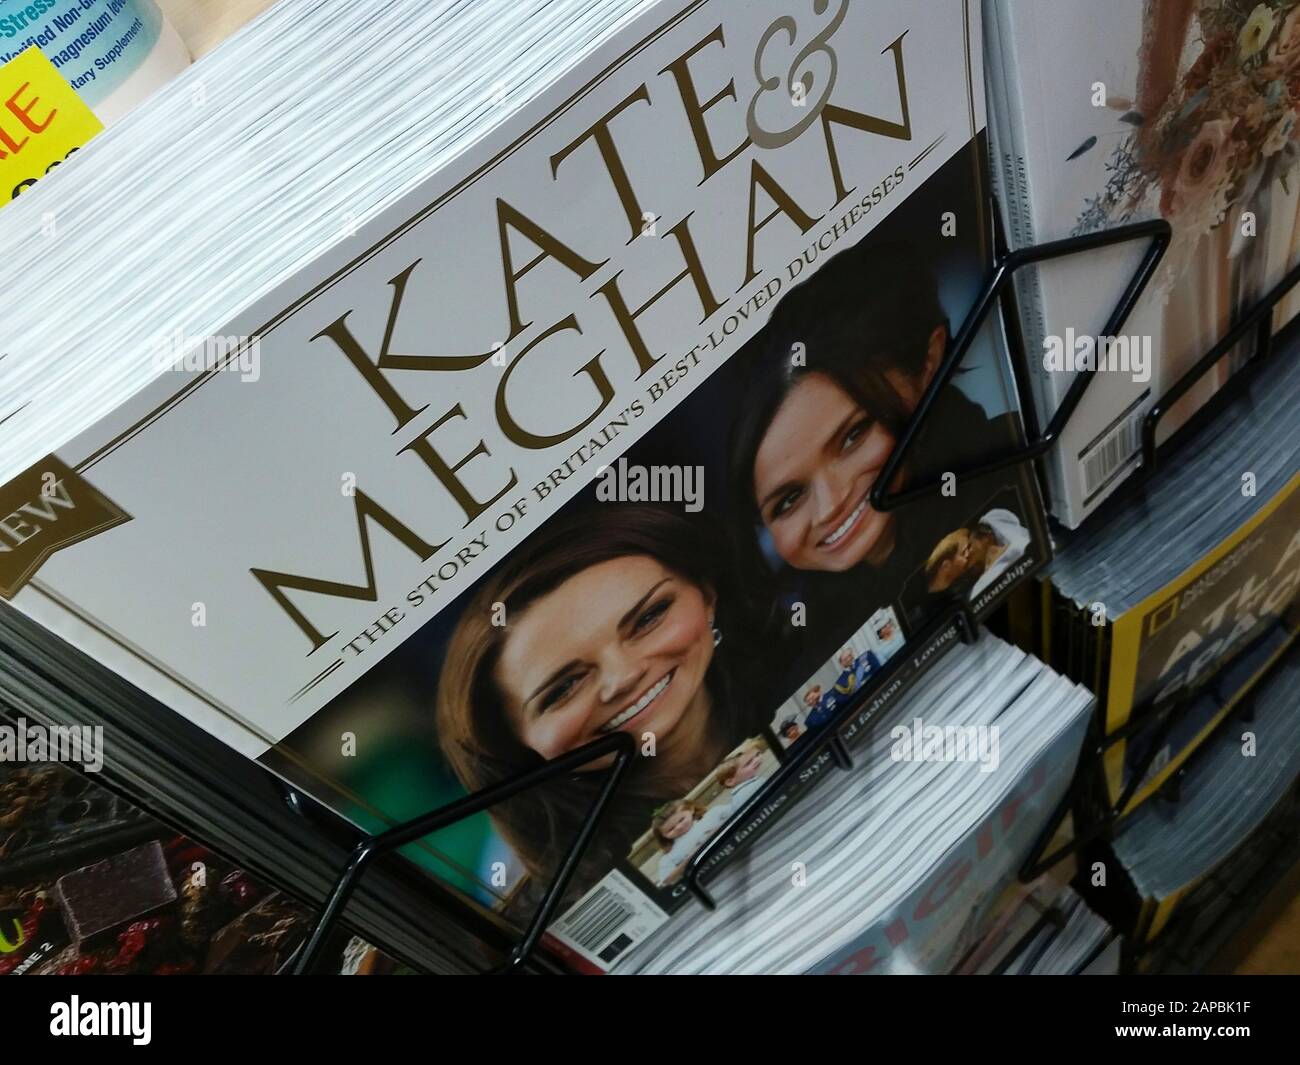 A commemorative magazine on a newsstand in New York celebrates Great Britain’s “best-loved duchesses” Kate Middleton, Duchess of Cambridge and Meghan Markle, Duchess of Sussex, seen on Friday, January 10, 2020. Markle and her husband Prince Harry announced that they would be moving out of Great Britain, becoming financially independent, breaking with the Royal Family and creating their own brand “Sussex Royal”. (© Richard B. Levine) Stock Photo